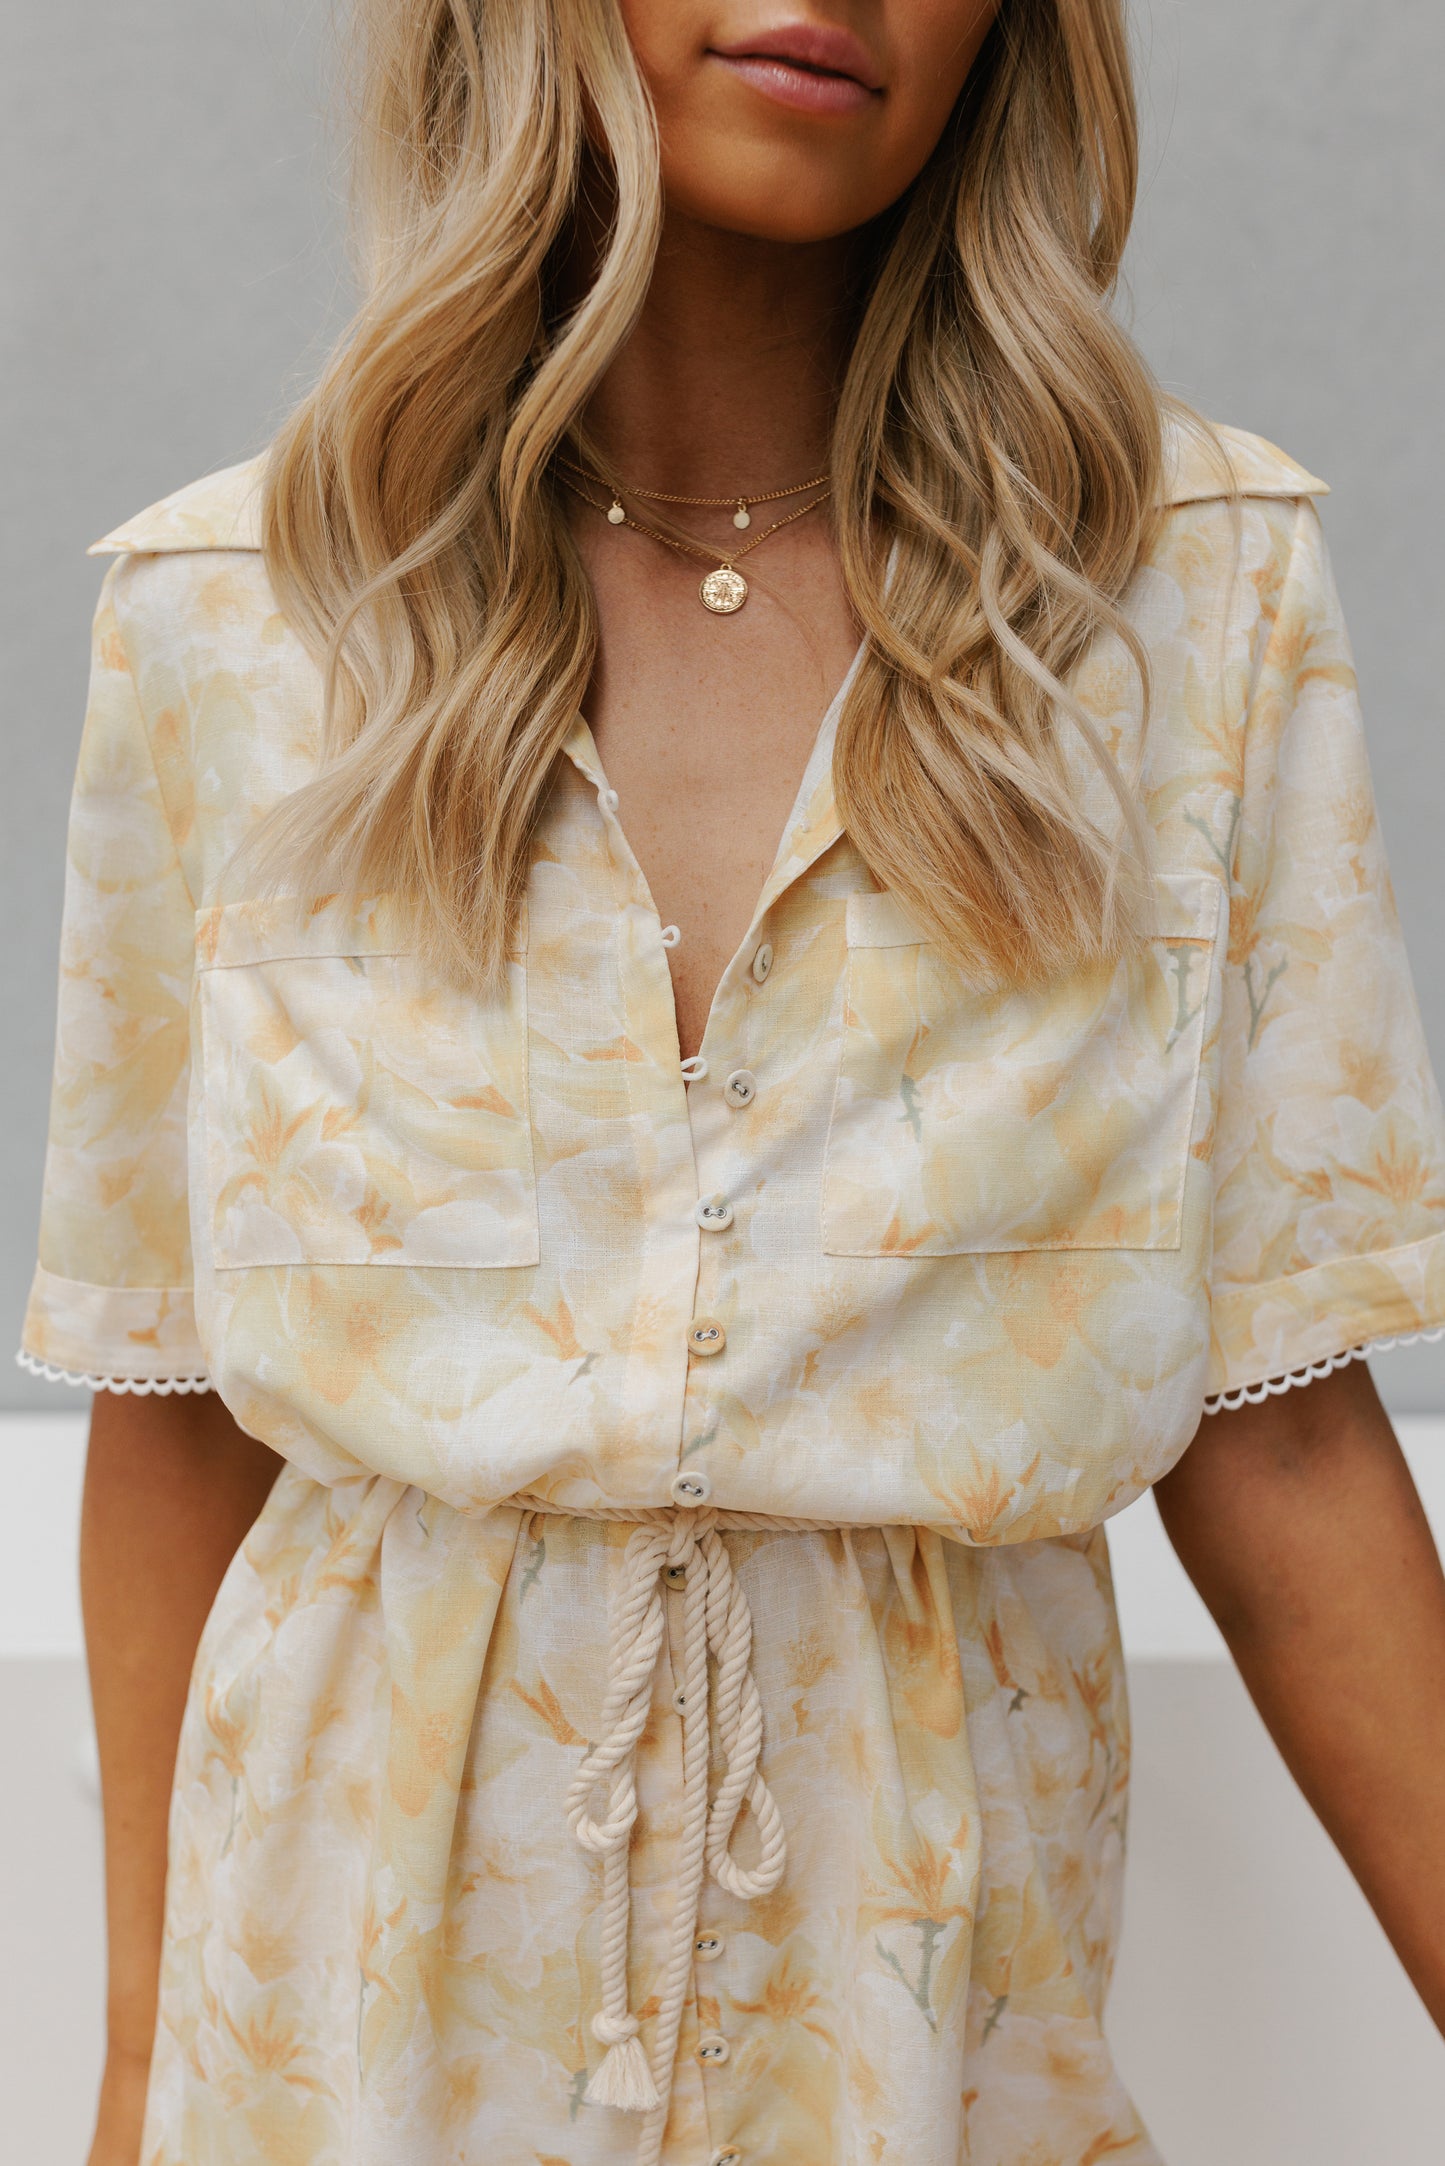 Kyrie Dress - Yellow Floral